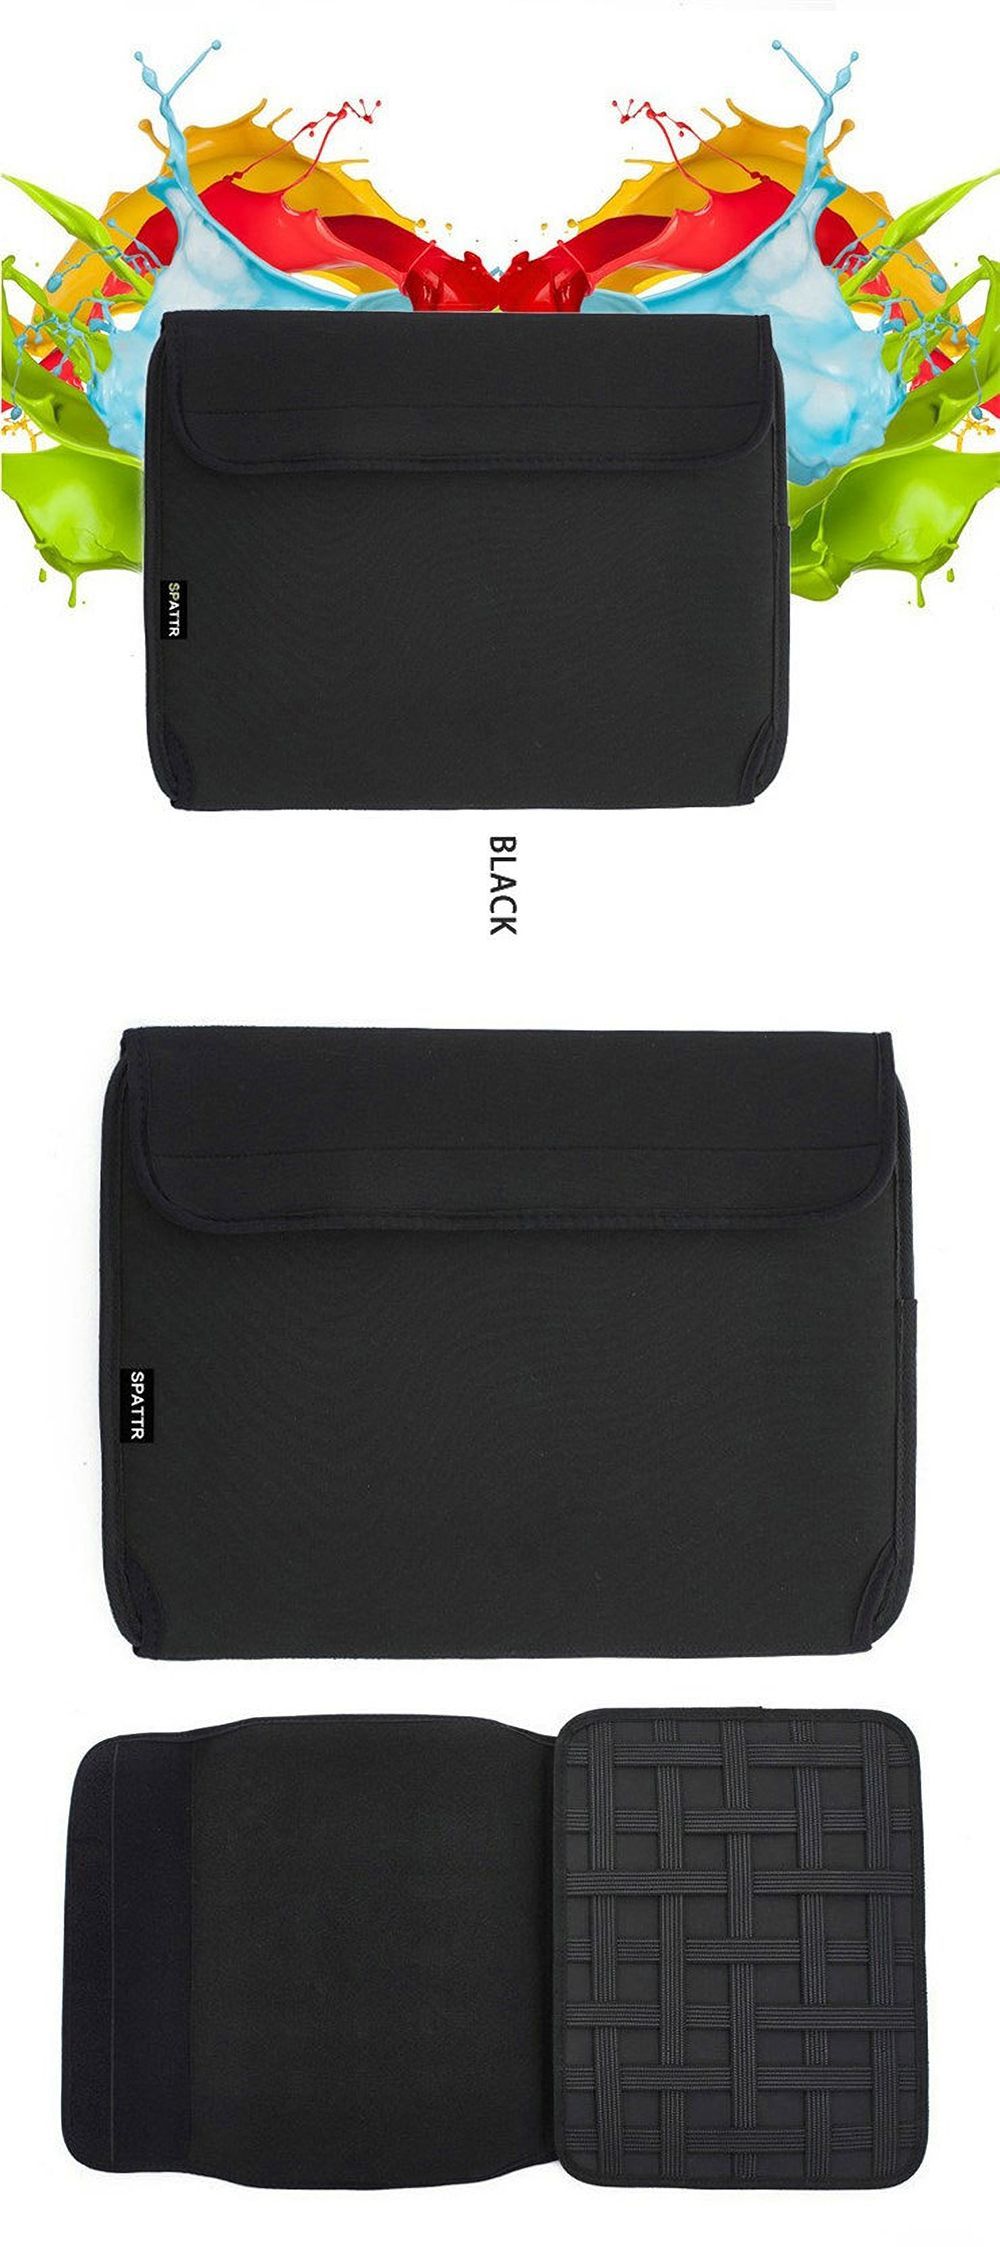 Tablet-Storage-Bag-Sleeve-with-Organizer-Protective-Pouch-Bag-1013-Inch-Travel-Laptop-Tablet-Case-fo-1540582